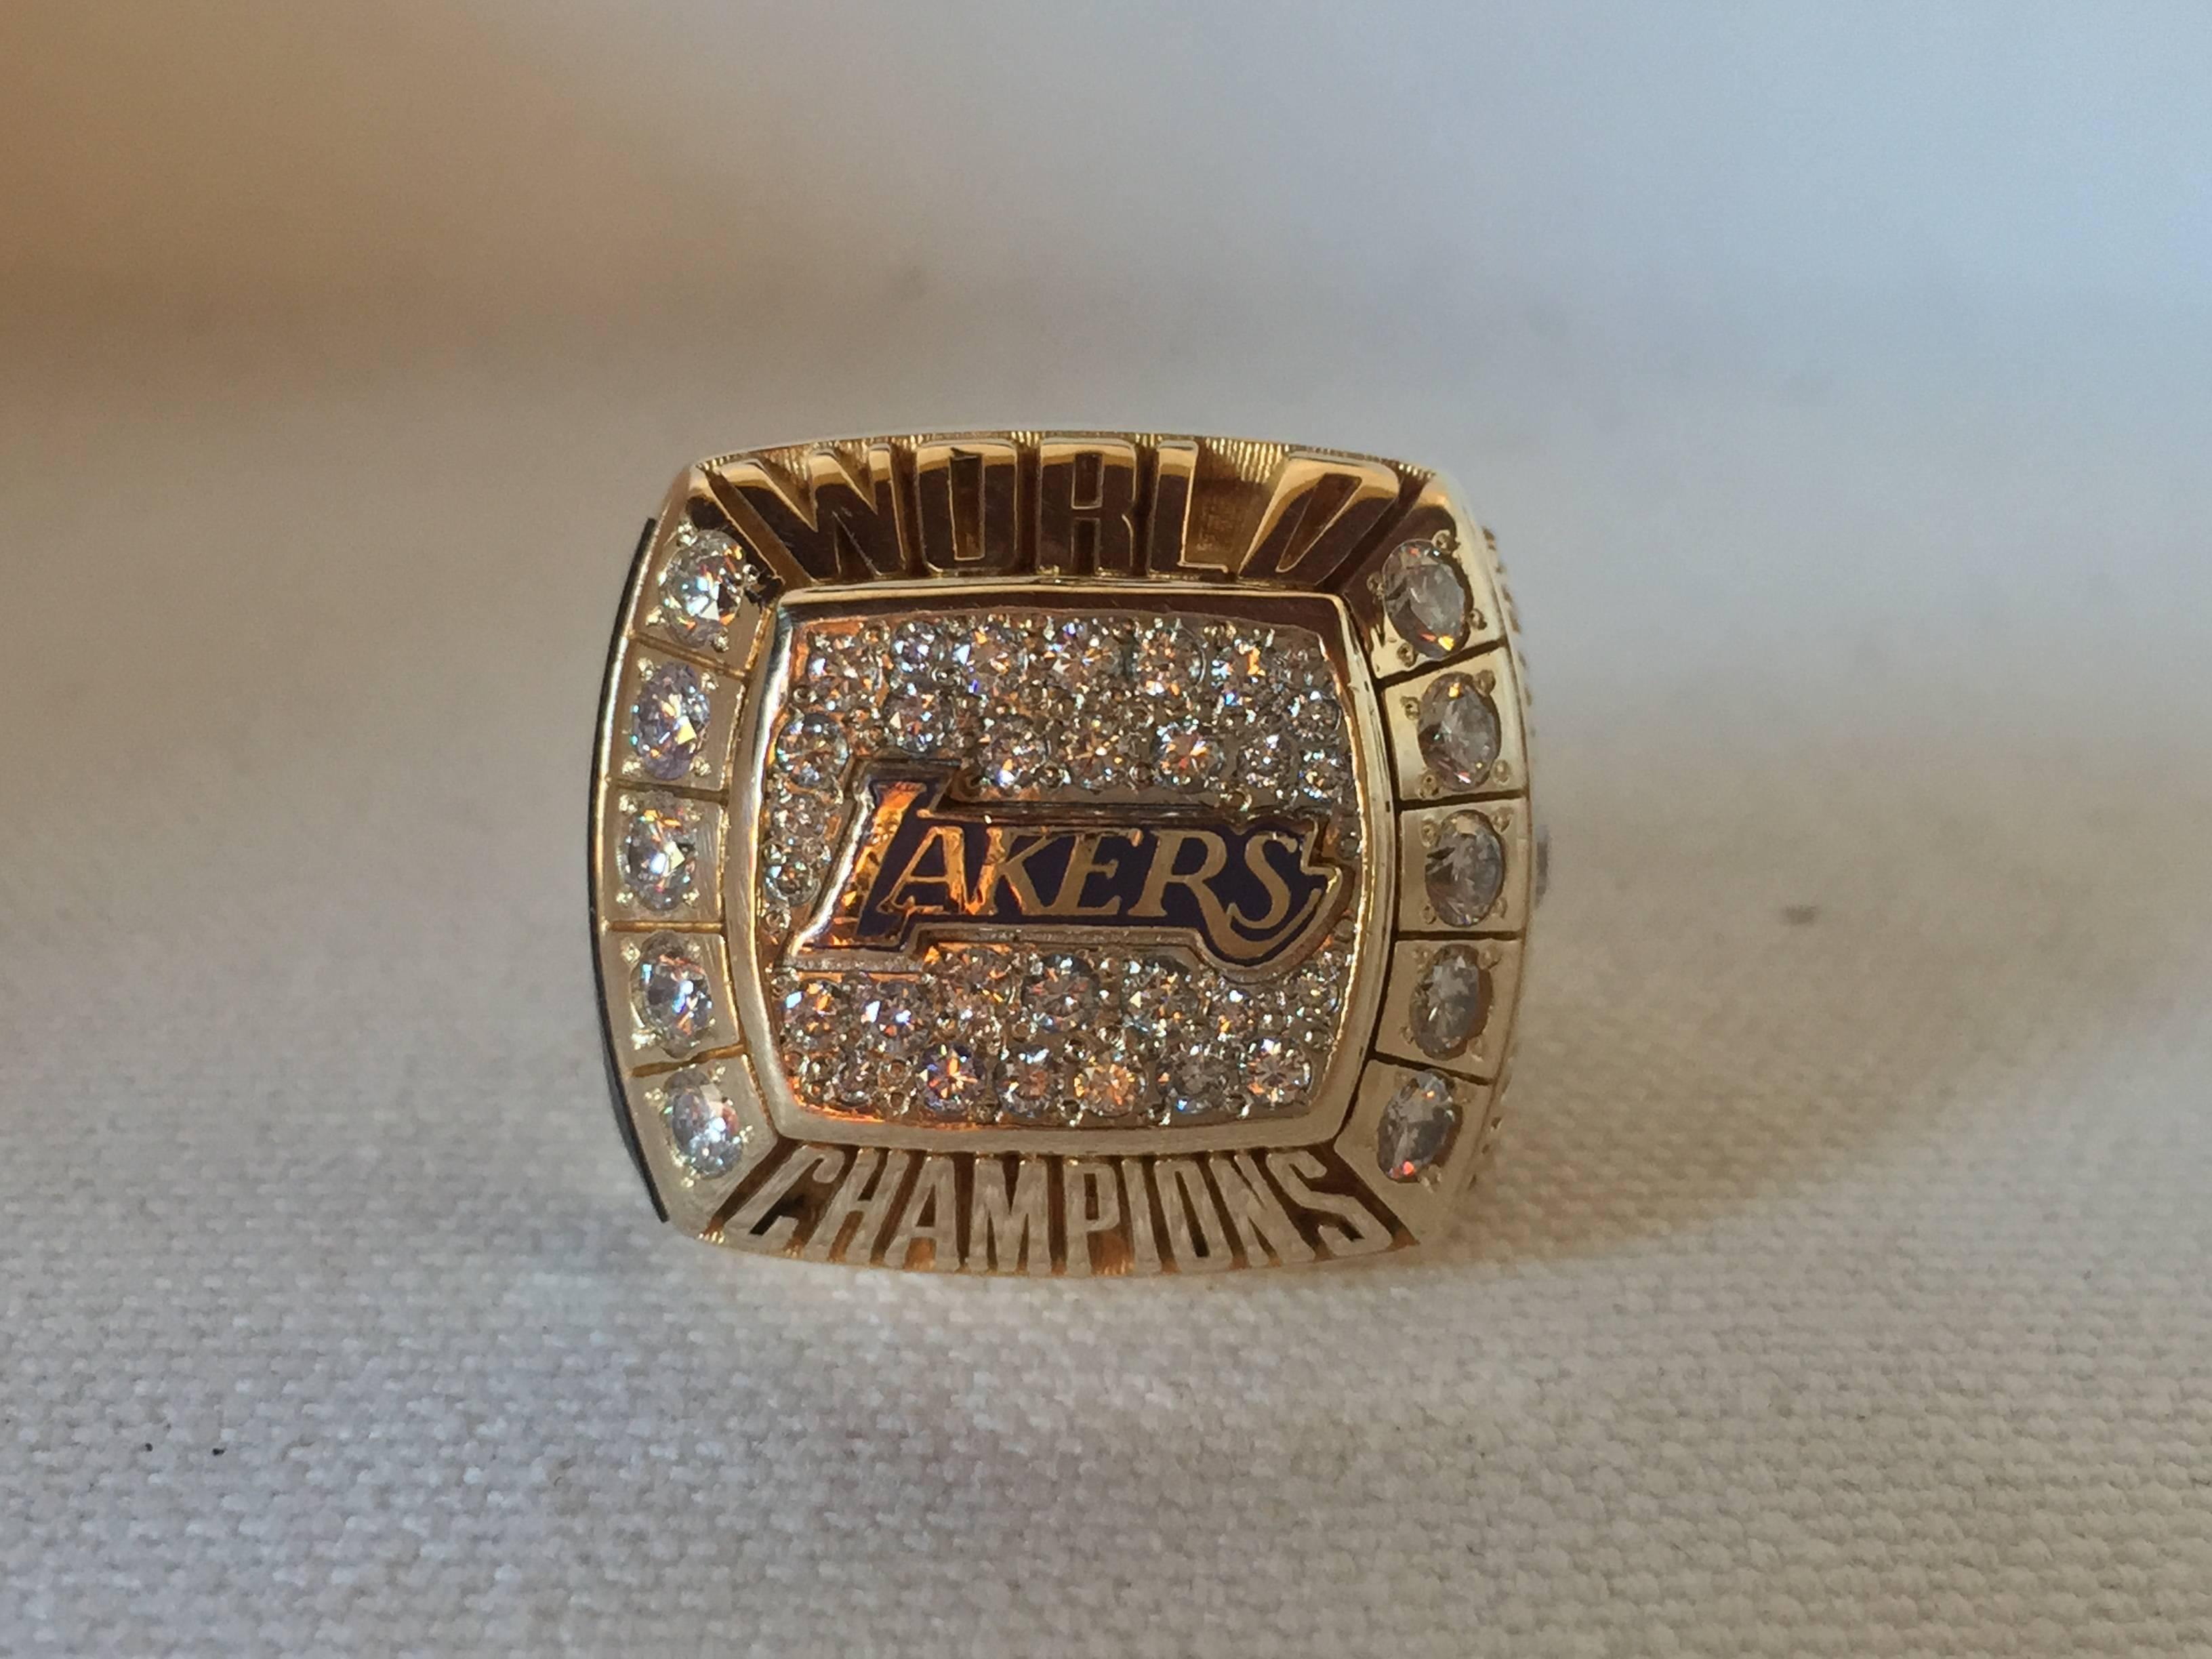 2000 Los Angeles Lakers NBA Championship ring with original presentation box, this is the same ring players received and is a full size 